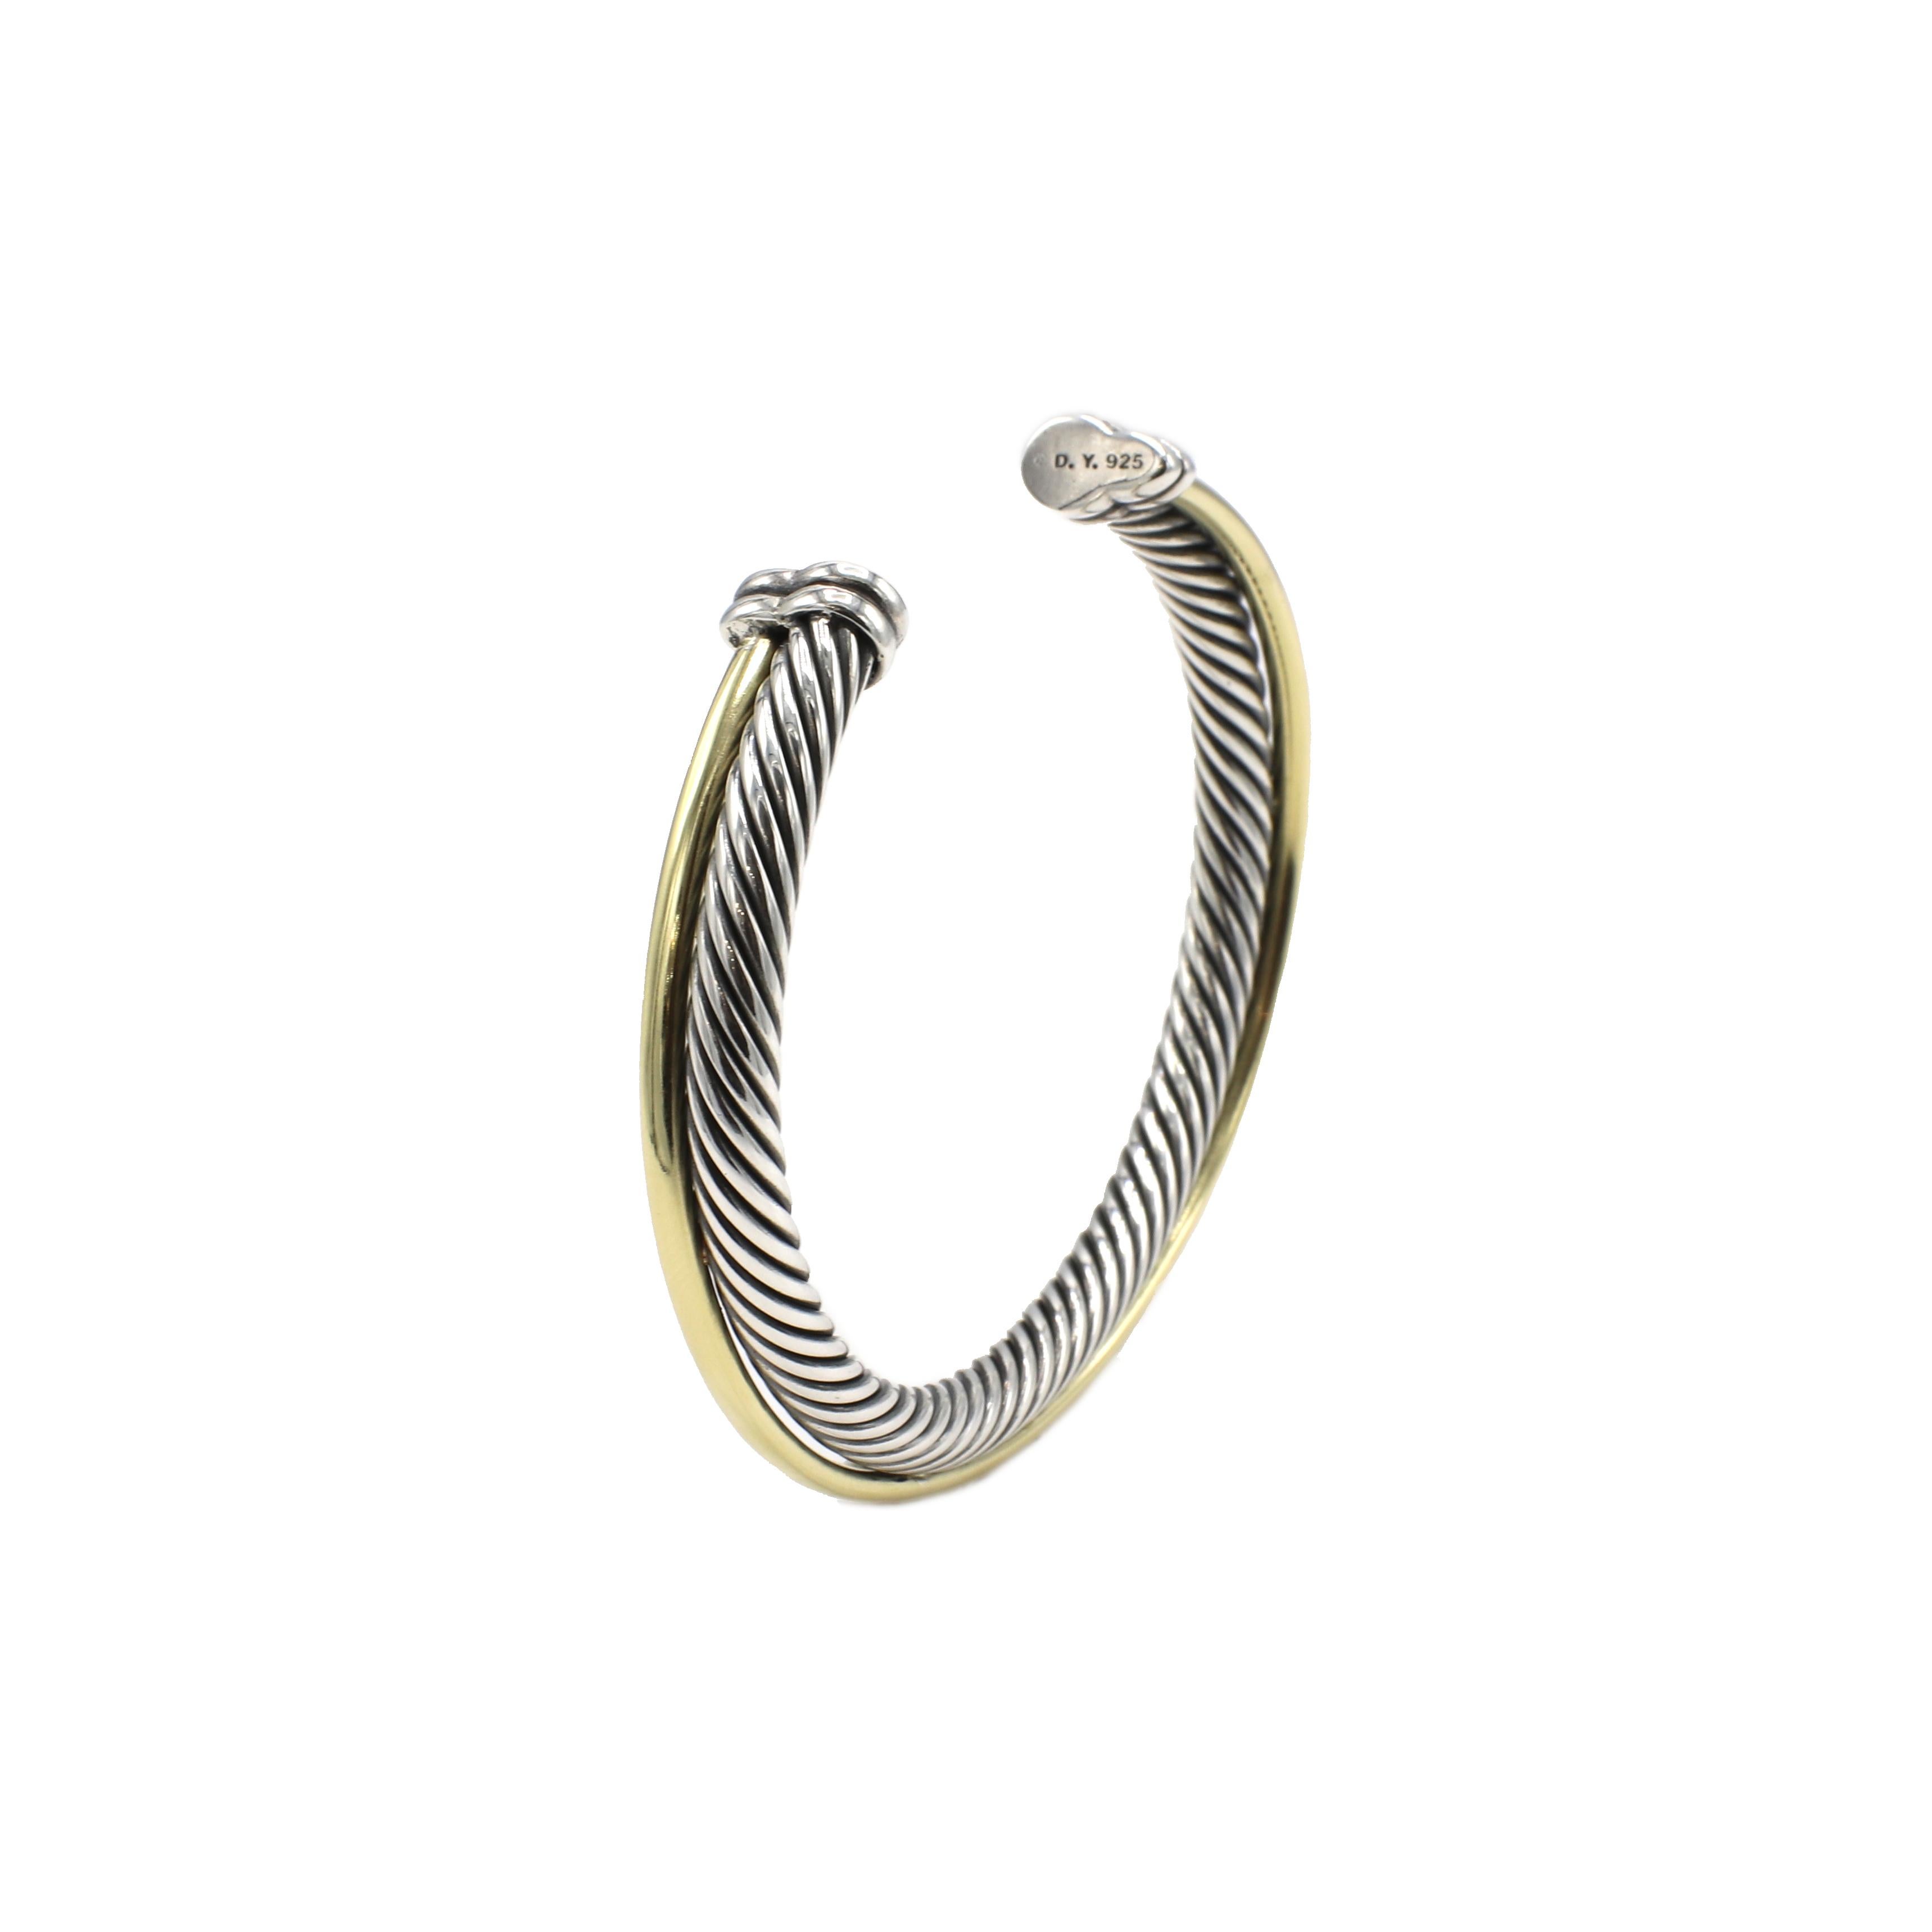 David Yurman Crossover Collection Sterling Silver & Gold Crossover Cable Bangle Bracelet 
Metal: Sterling silver & 18k yellow gold
Weight: 35.49 grams
Diameter: 60mm
Width: 5mm
Length: Fits a wrist approx. 6.75